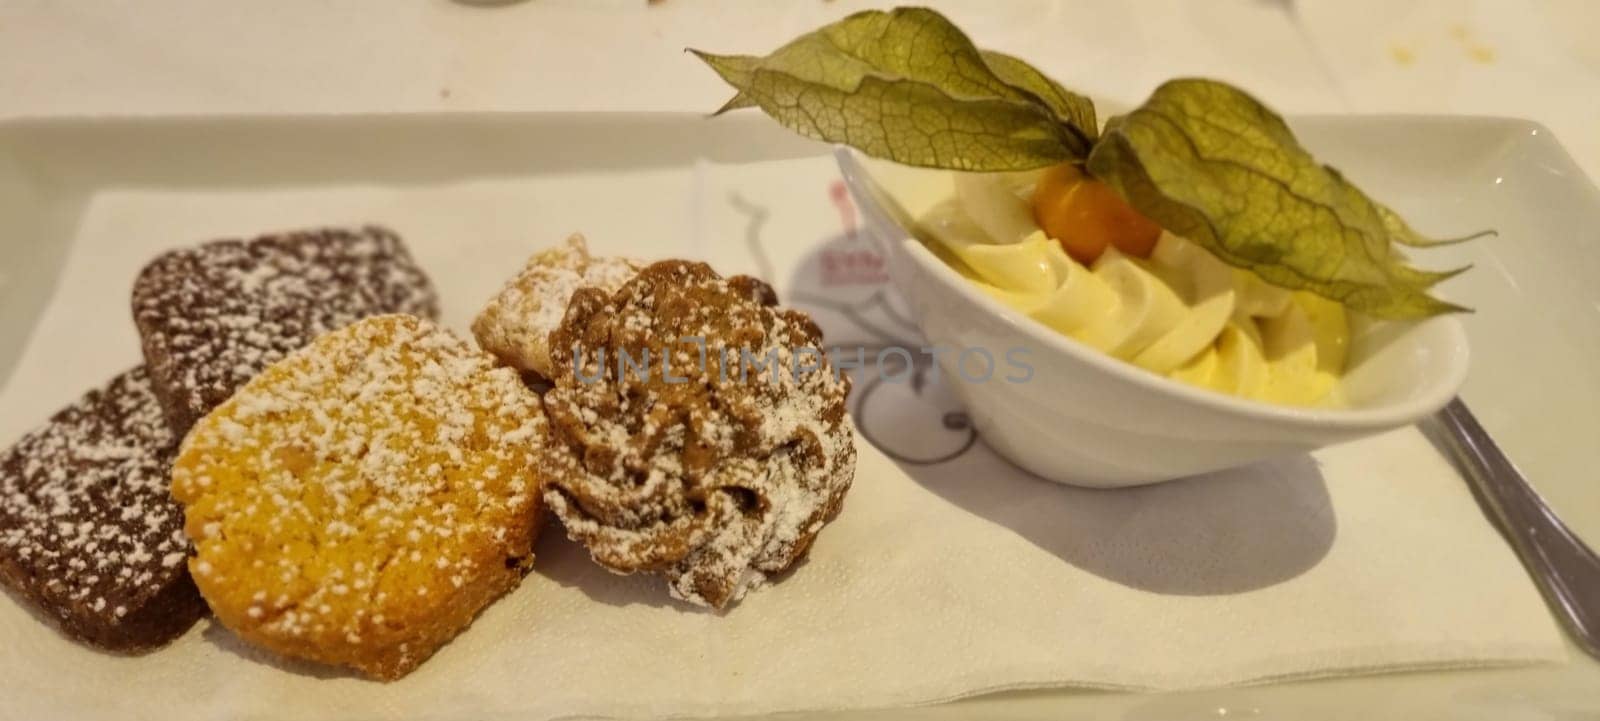 Delicious selection of mini pastries dusted with sugar, served with fresh whipped cream on a white plate